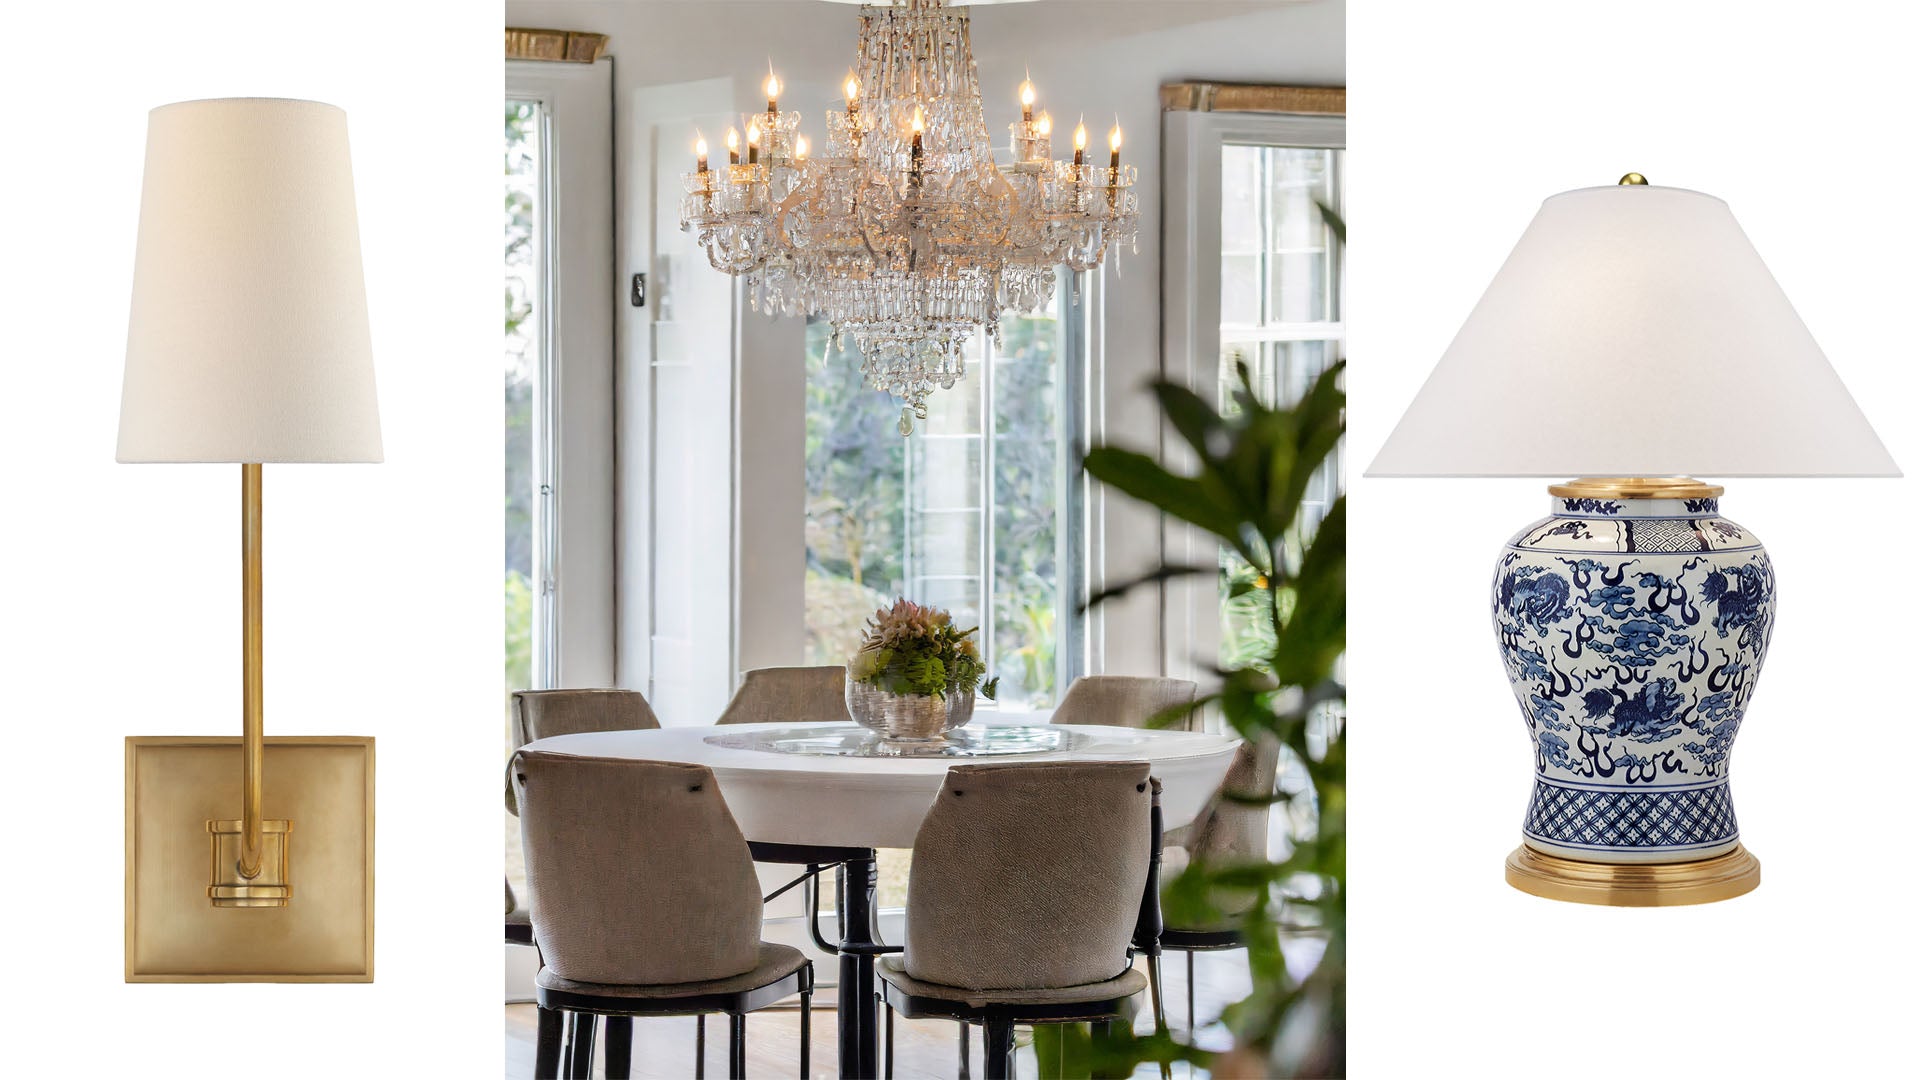 Transitional interior design style sconce, chandelier, and table lamp options.